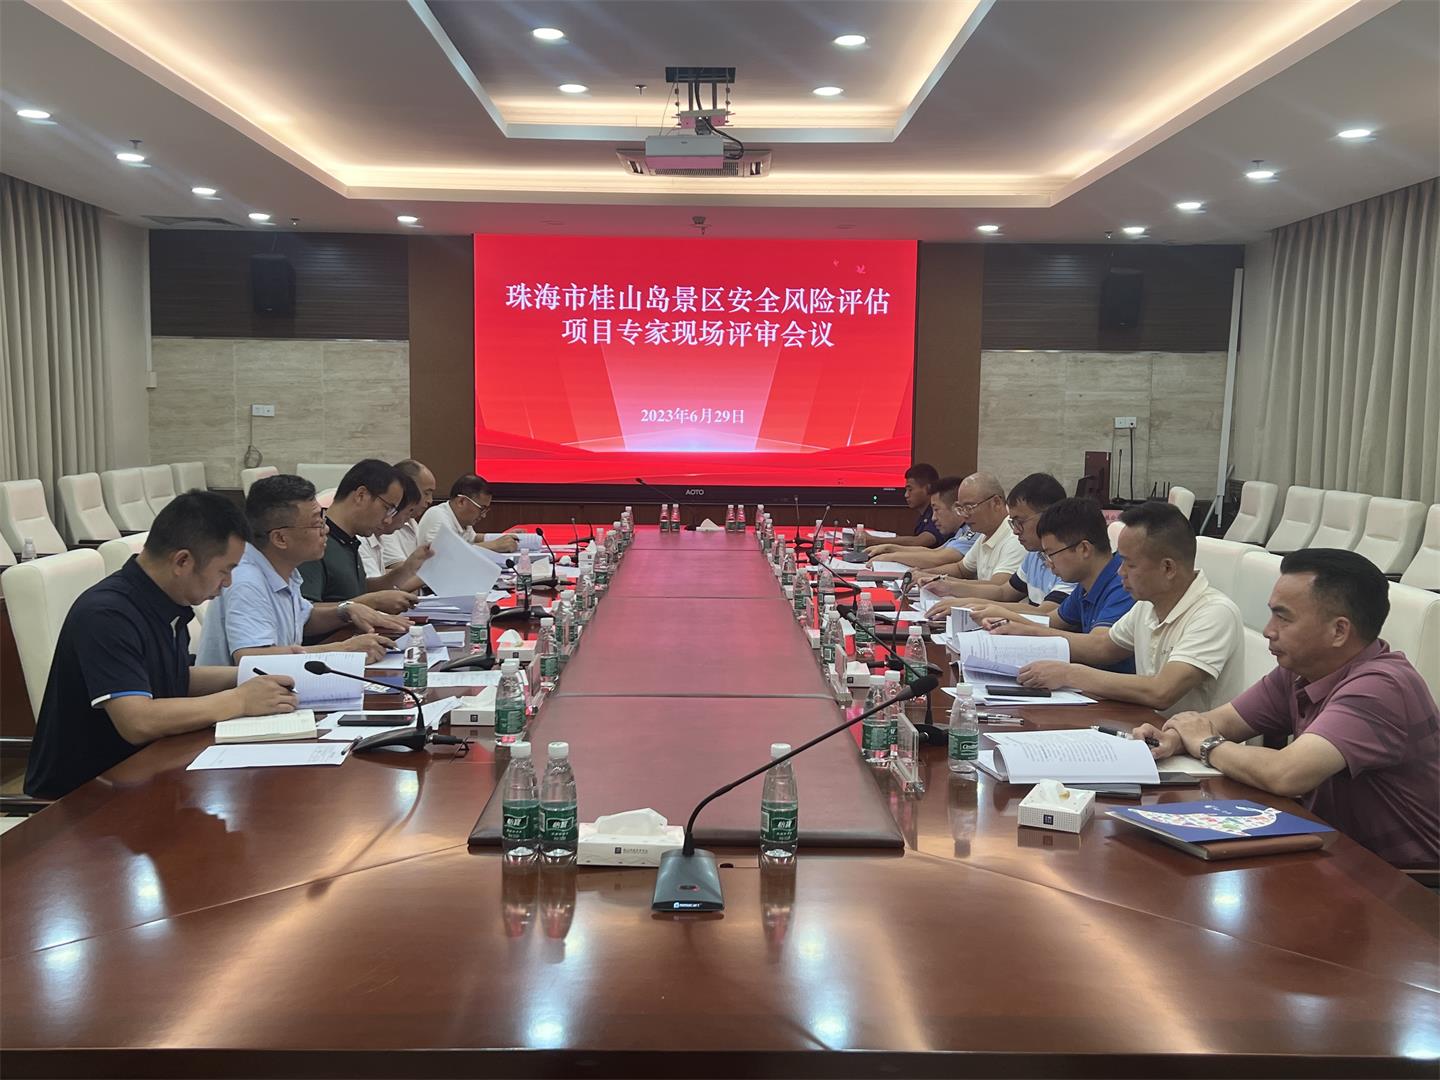 The Guishan Island tourism risk assessment project passed the expert review, laying a solid foundation for the creation of AAAA scenic spots